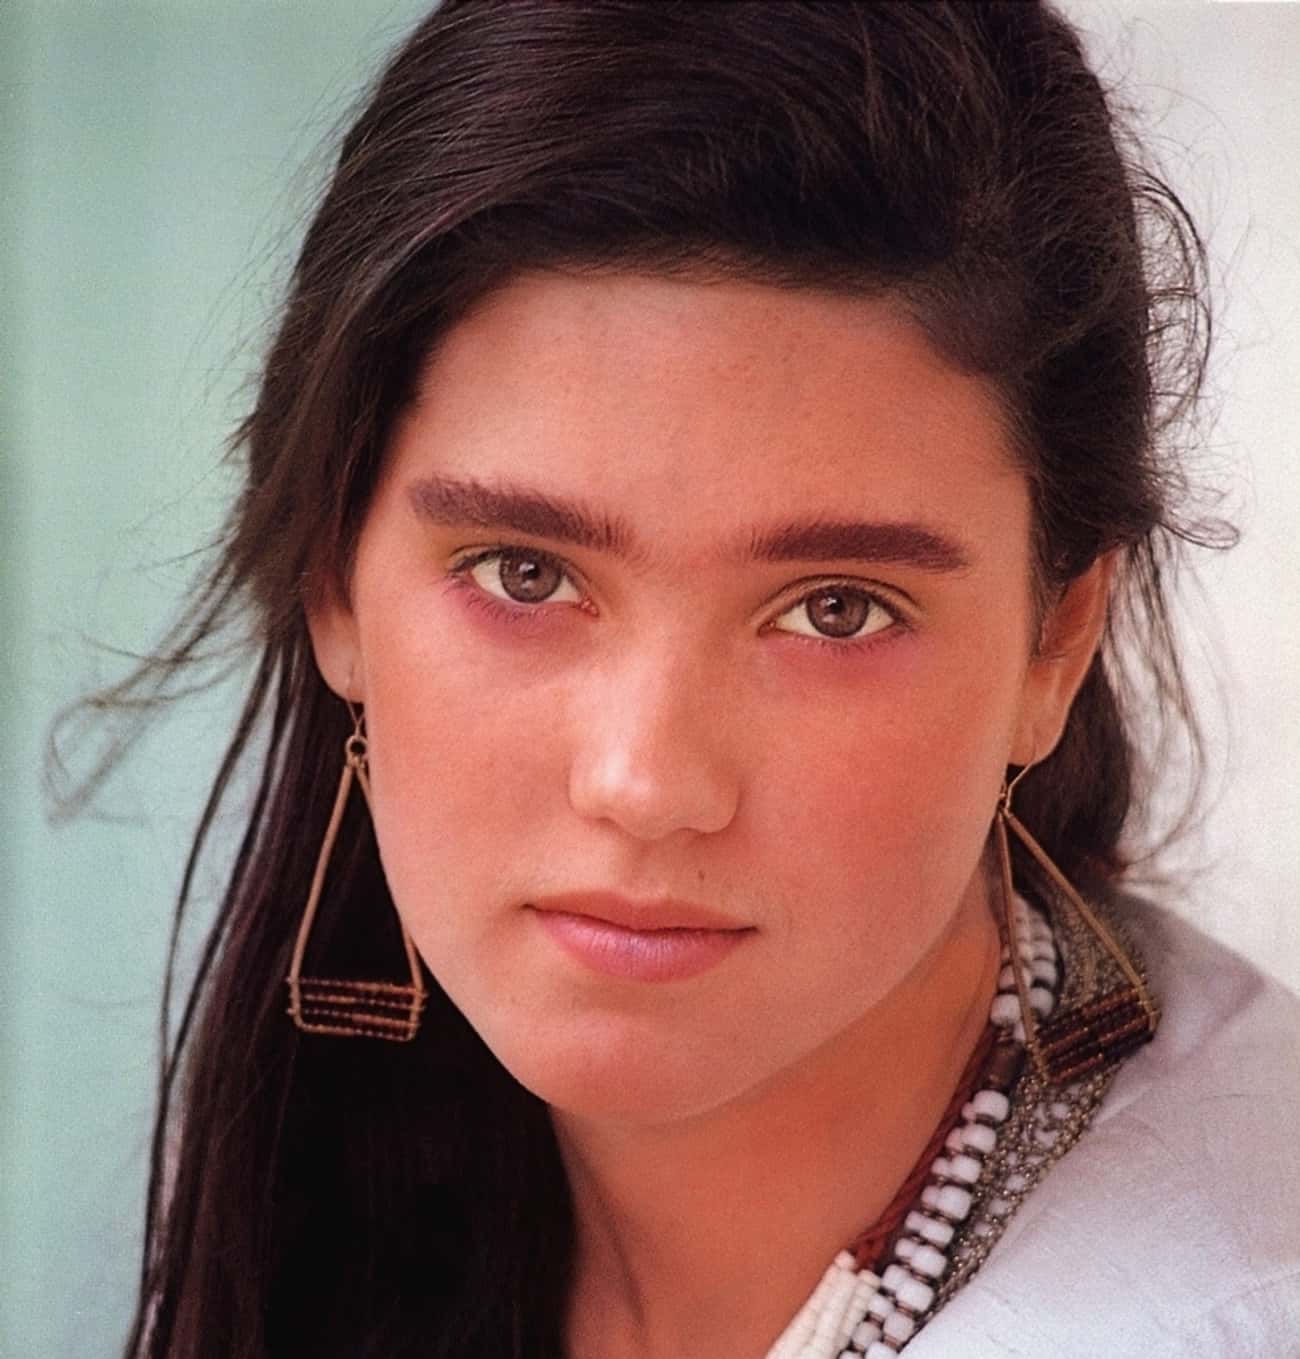 Young Jennifer Connelly's Model Face